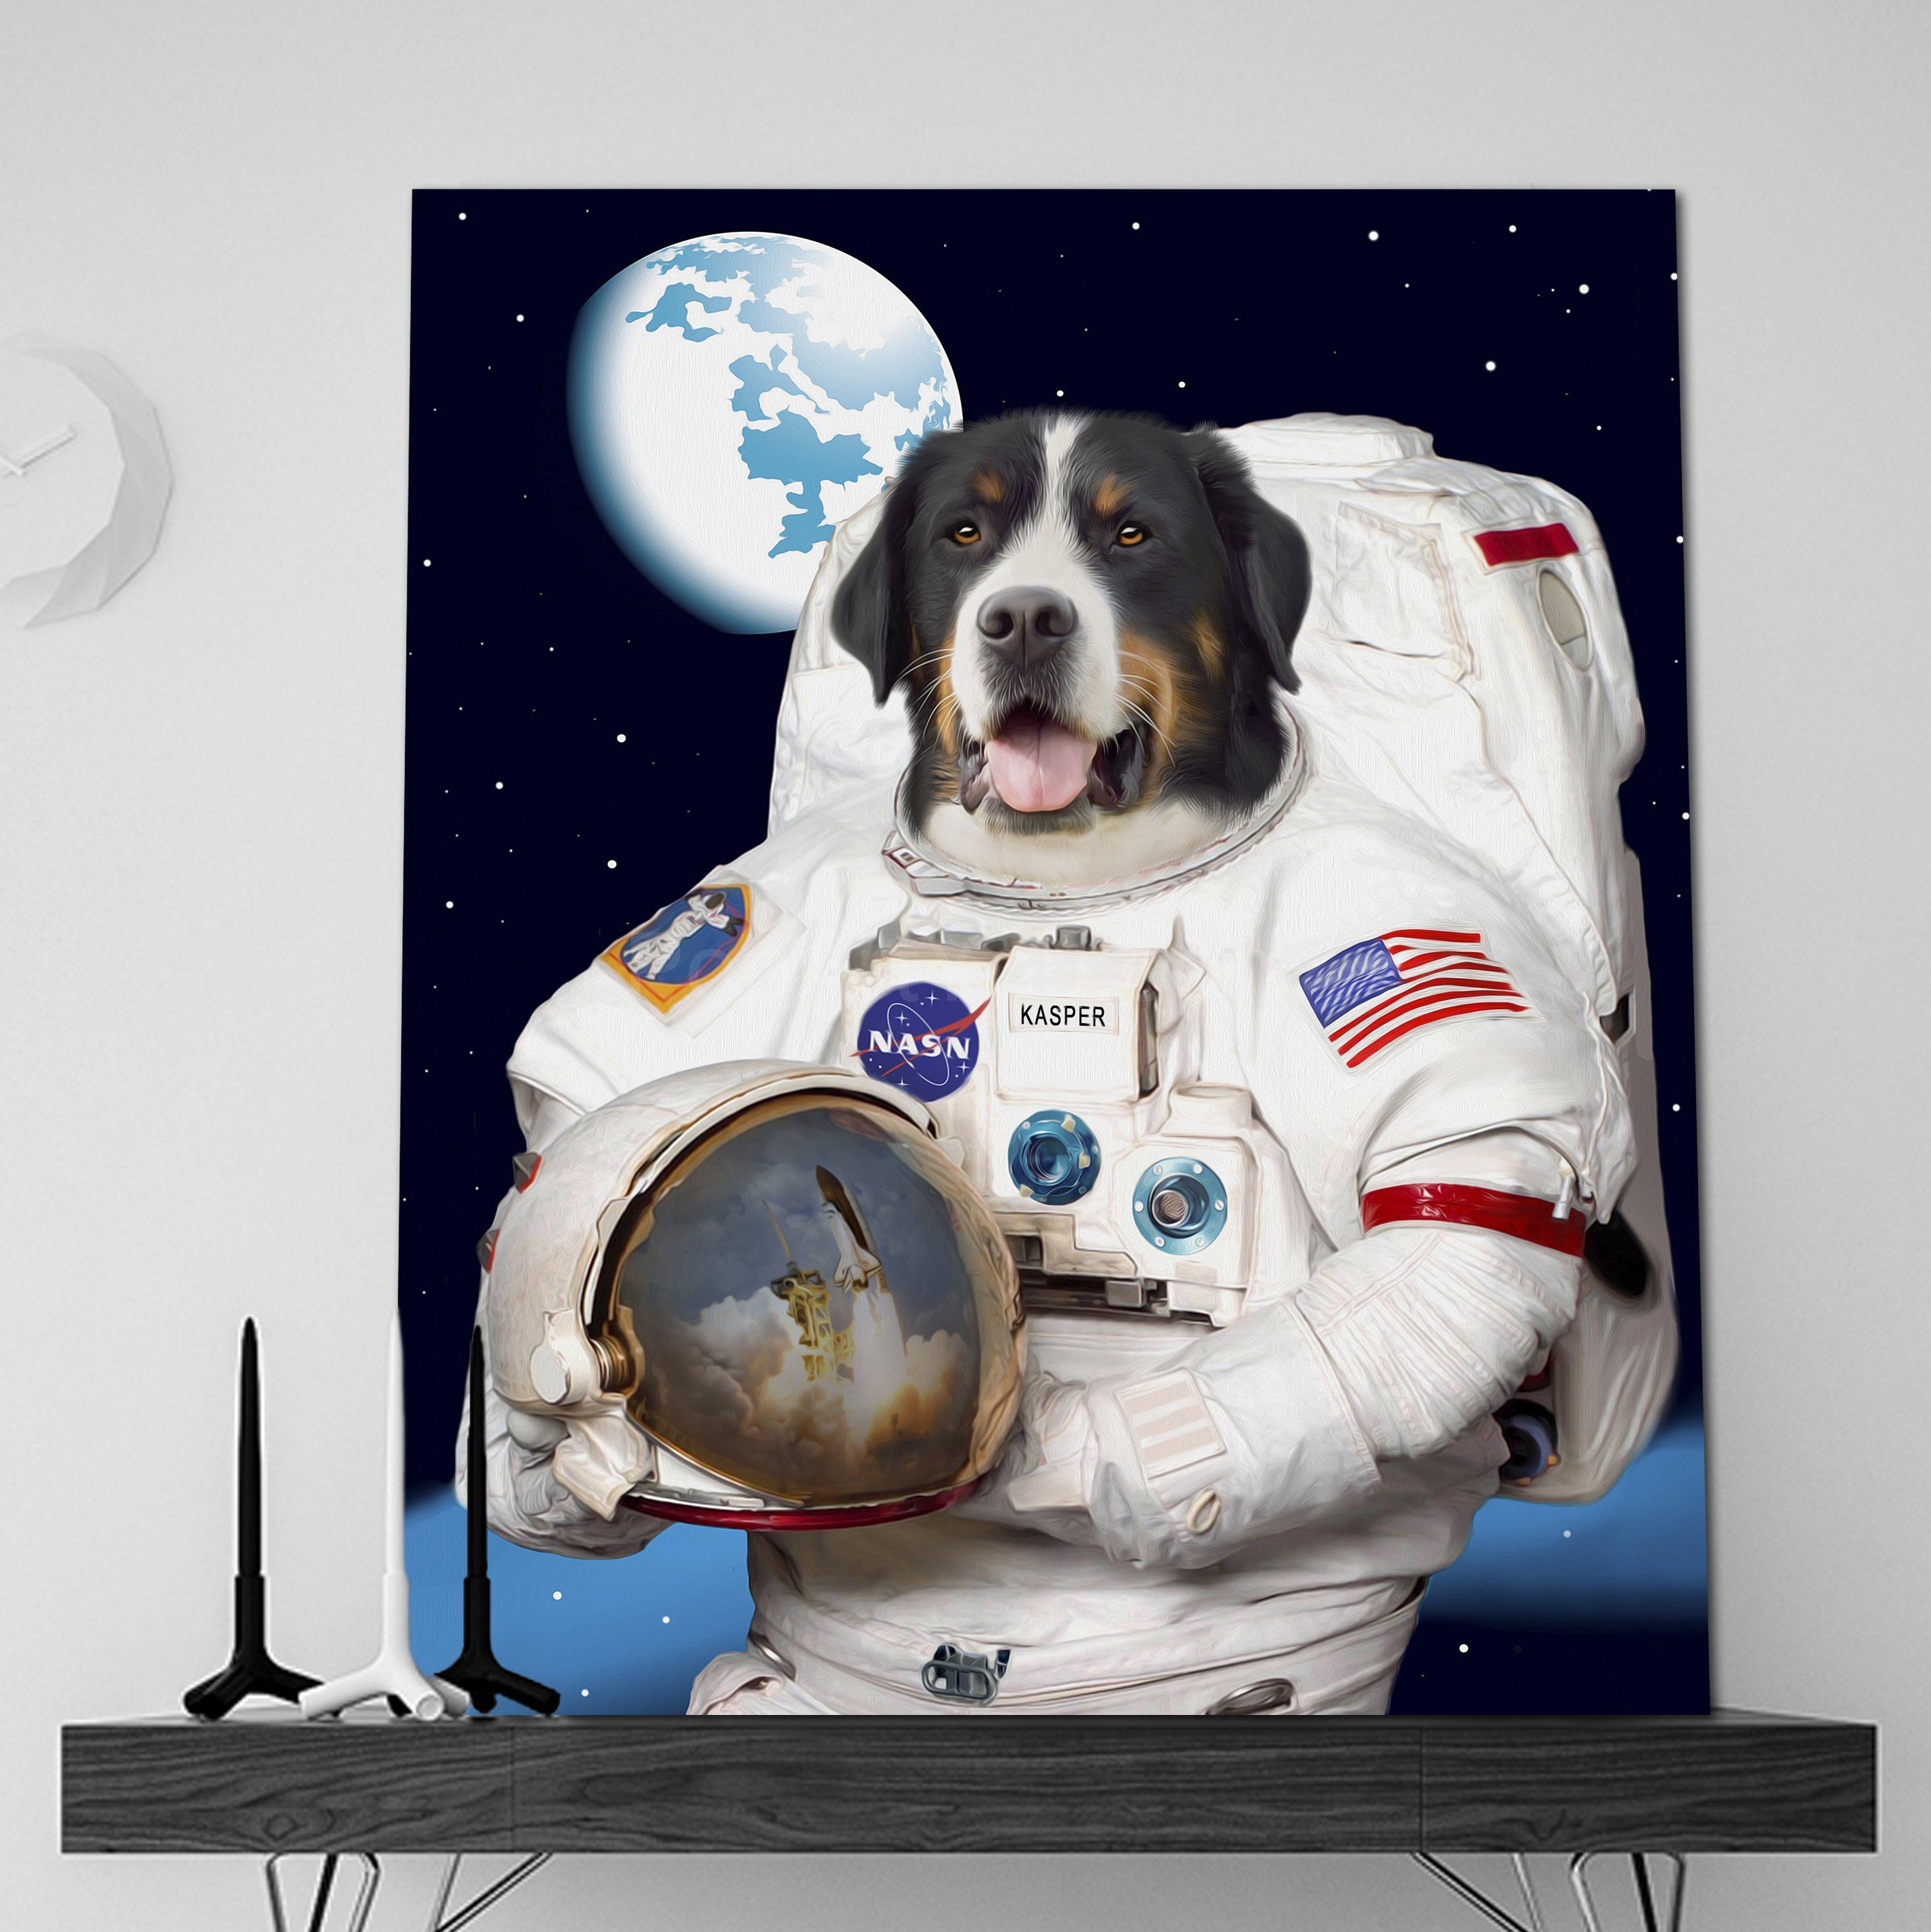 Portrait of a dog with a human body dressed in white Astronaut attire stands on a black wooden shelf